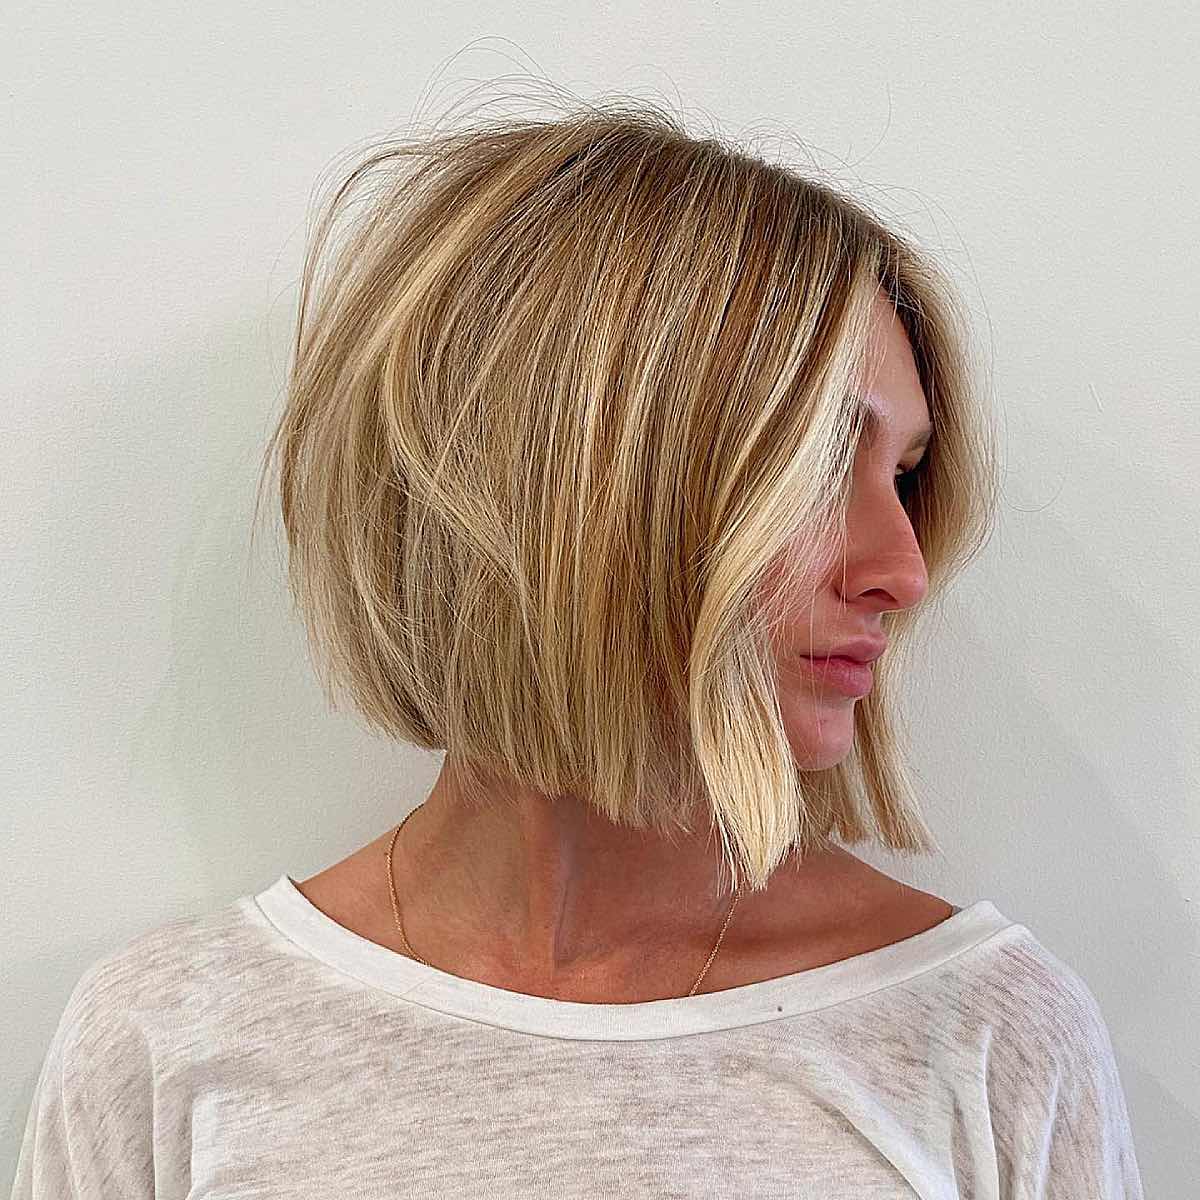 Beautifully Blonde Short Cropped Textured Hair